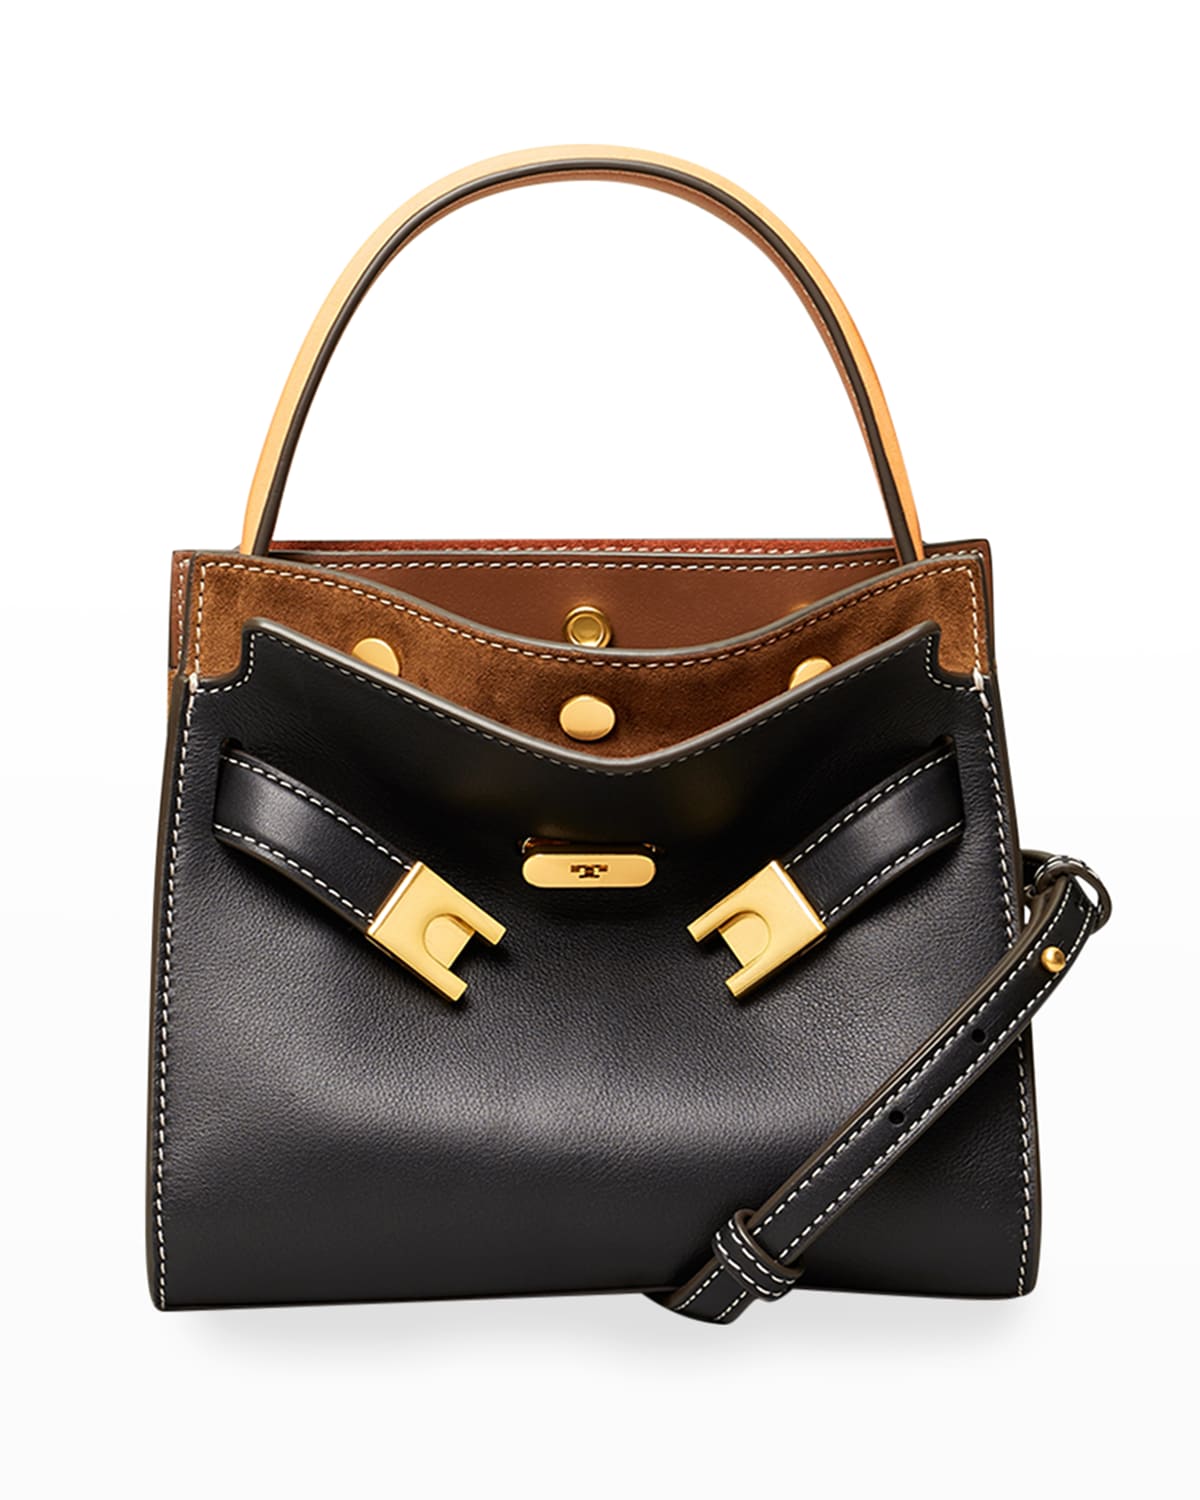 Tory Burch Lee Radziwill Pebbled Leather Double Bag | Neiman Marcus